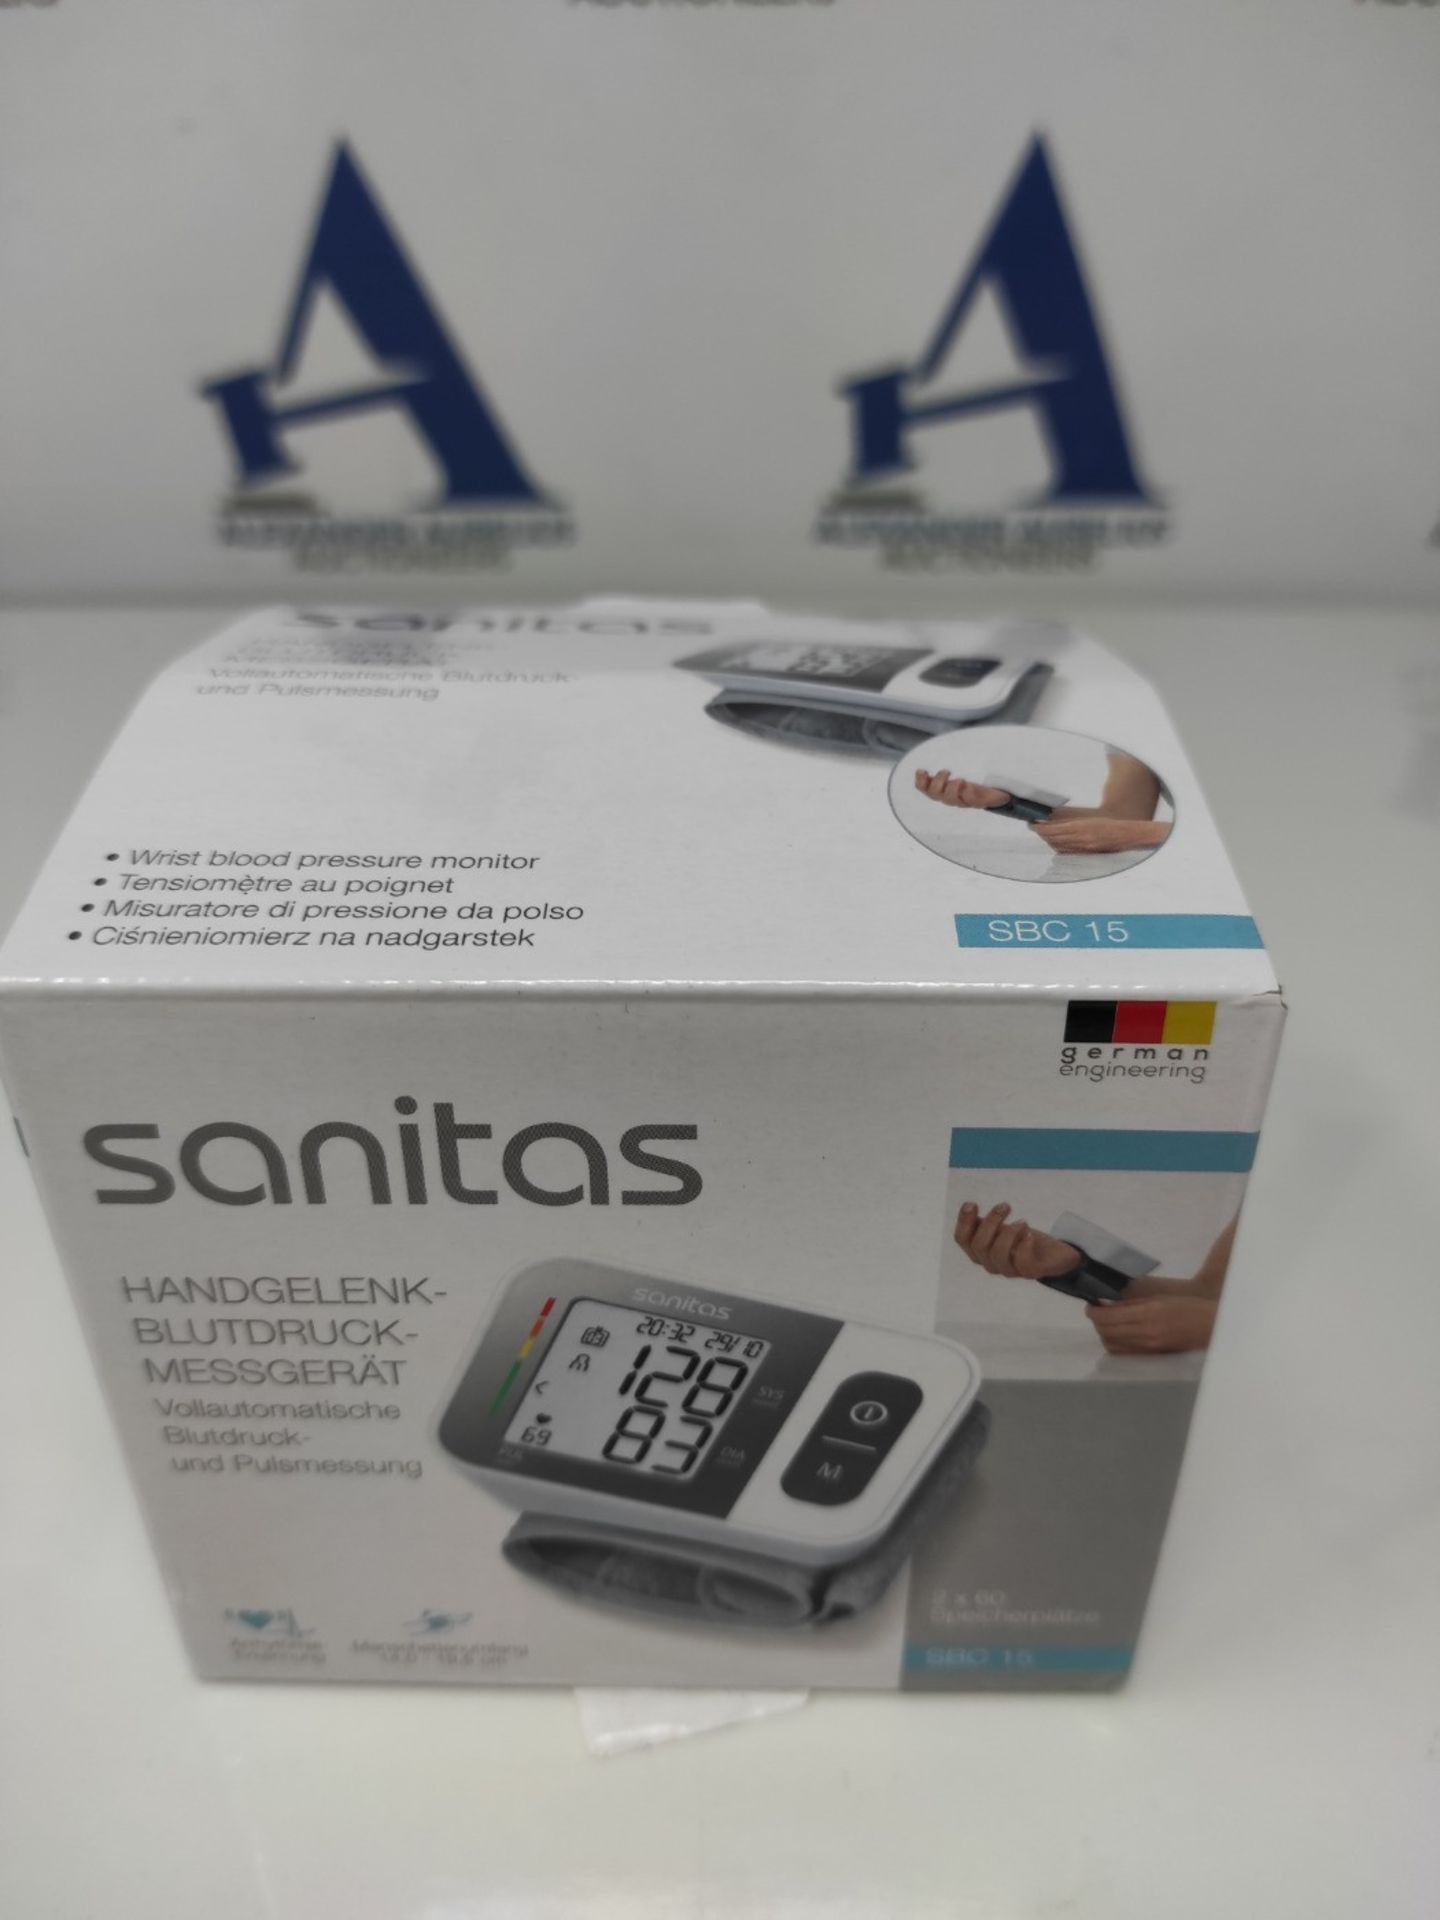 Sanitas SBC 15 wrist blood pressure monitor, fully automatic blood pressure and pulse - Image 5 of 6